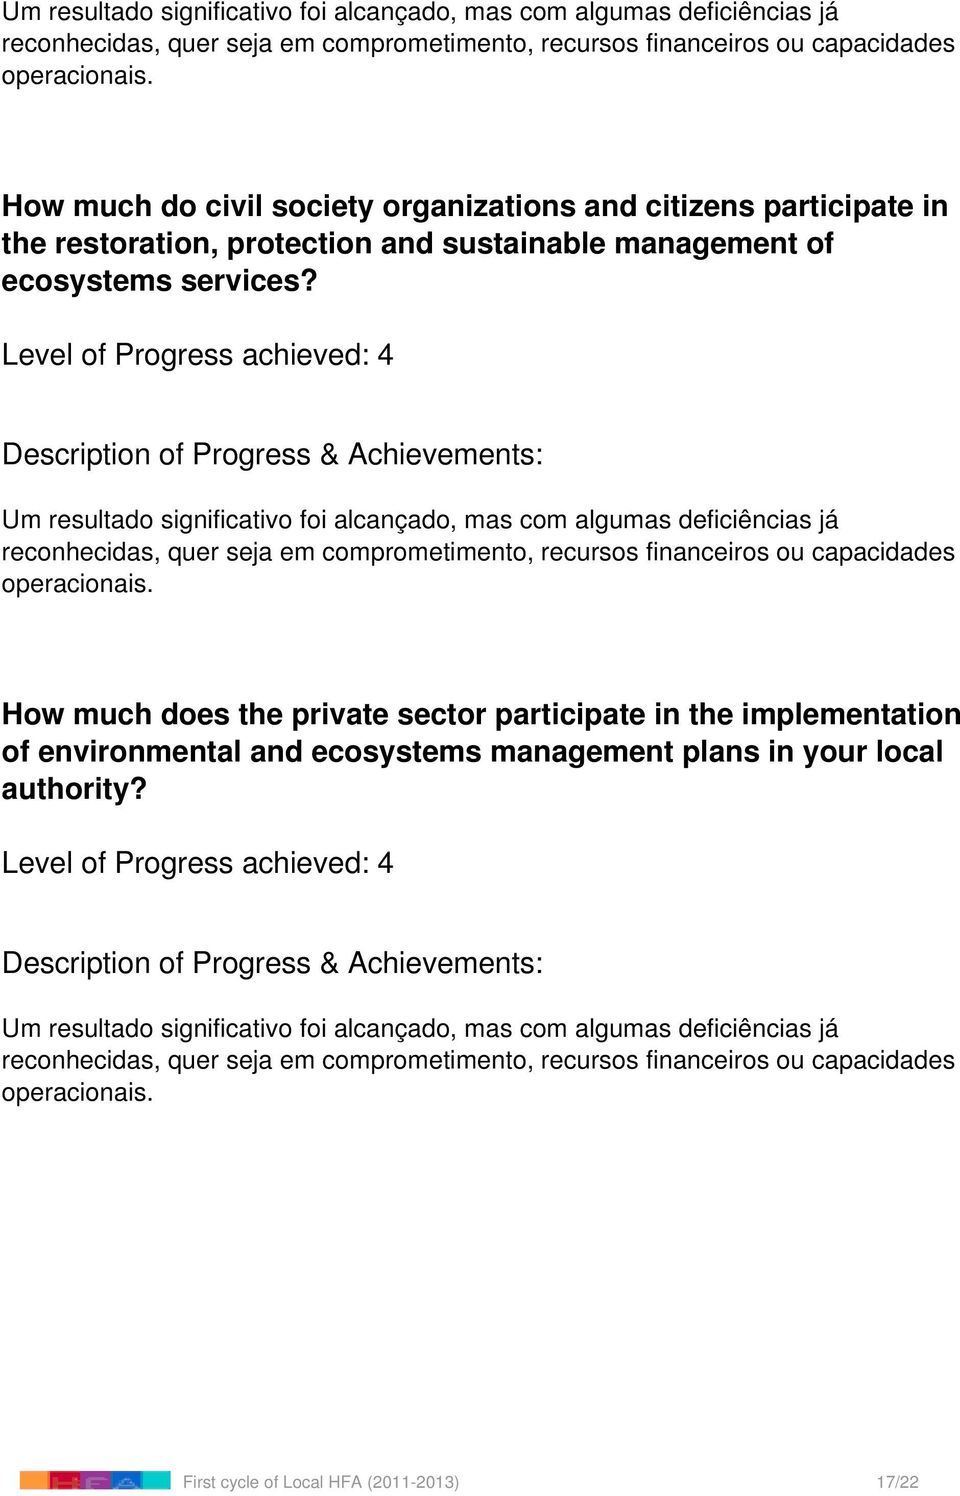 How much does the private sector participate in the implementation of